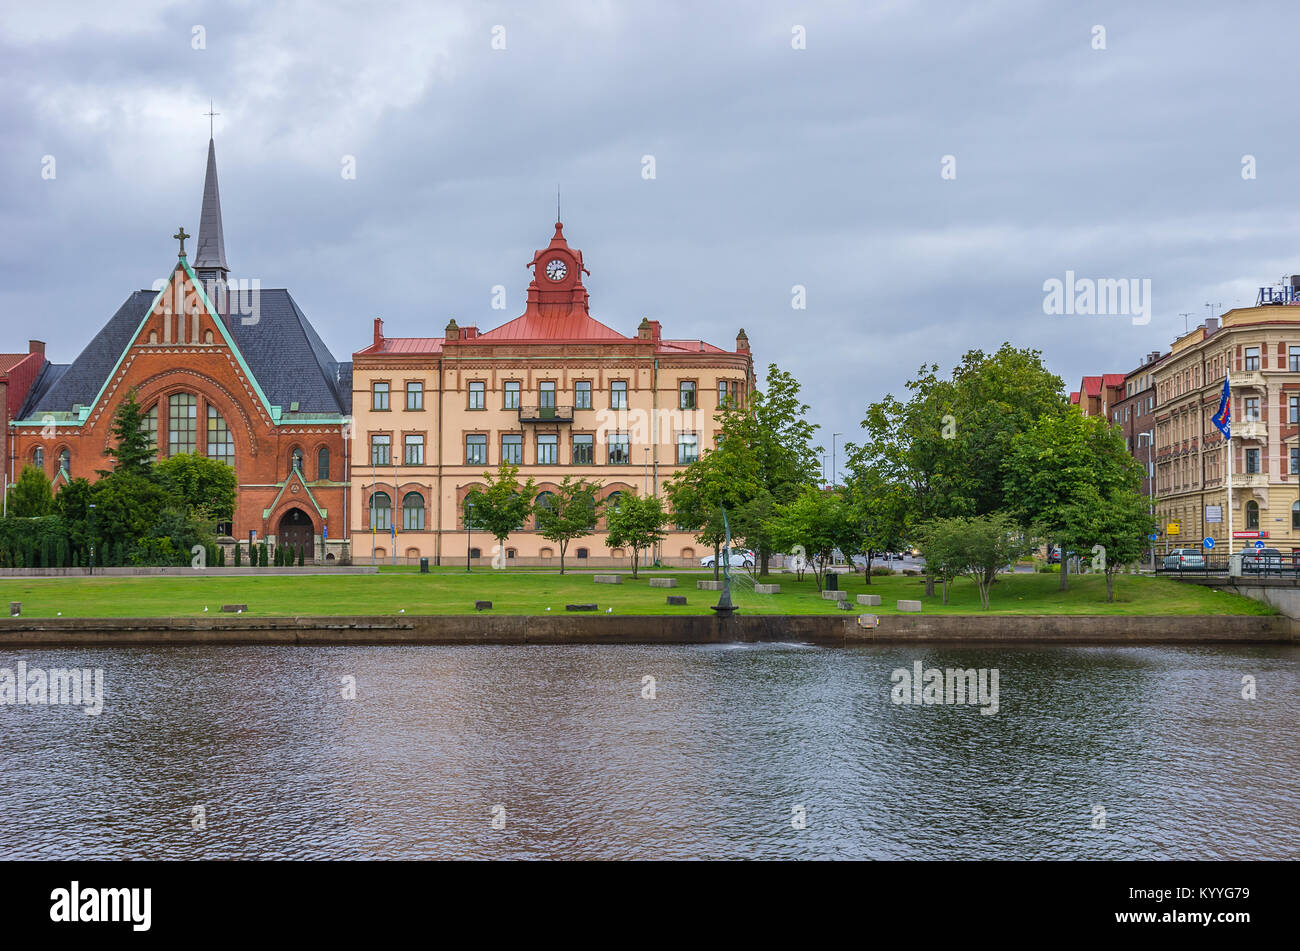 View of Immanuel Church (Immanuelskyrkan) by the Nissan river in Halmstad, Halland County, Sweden. Stock Photo